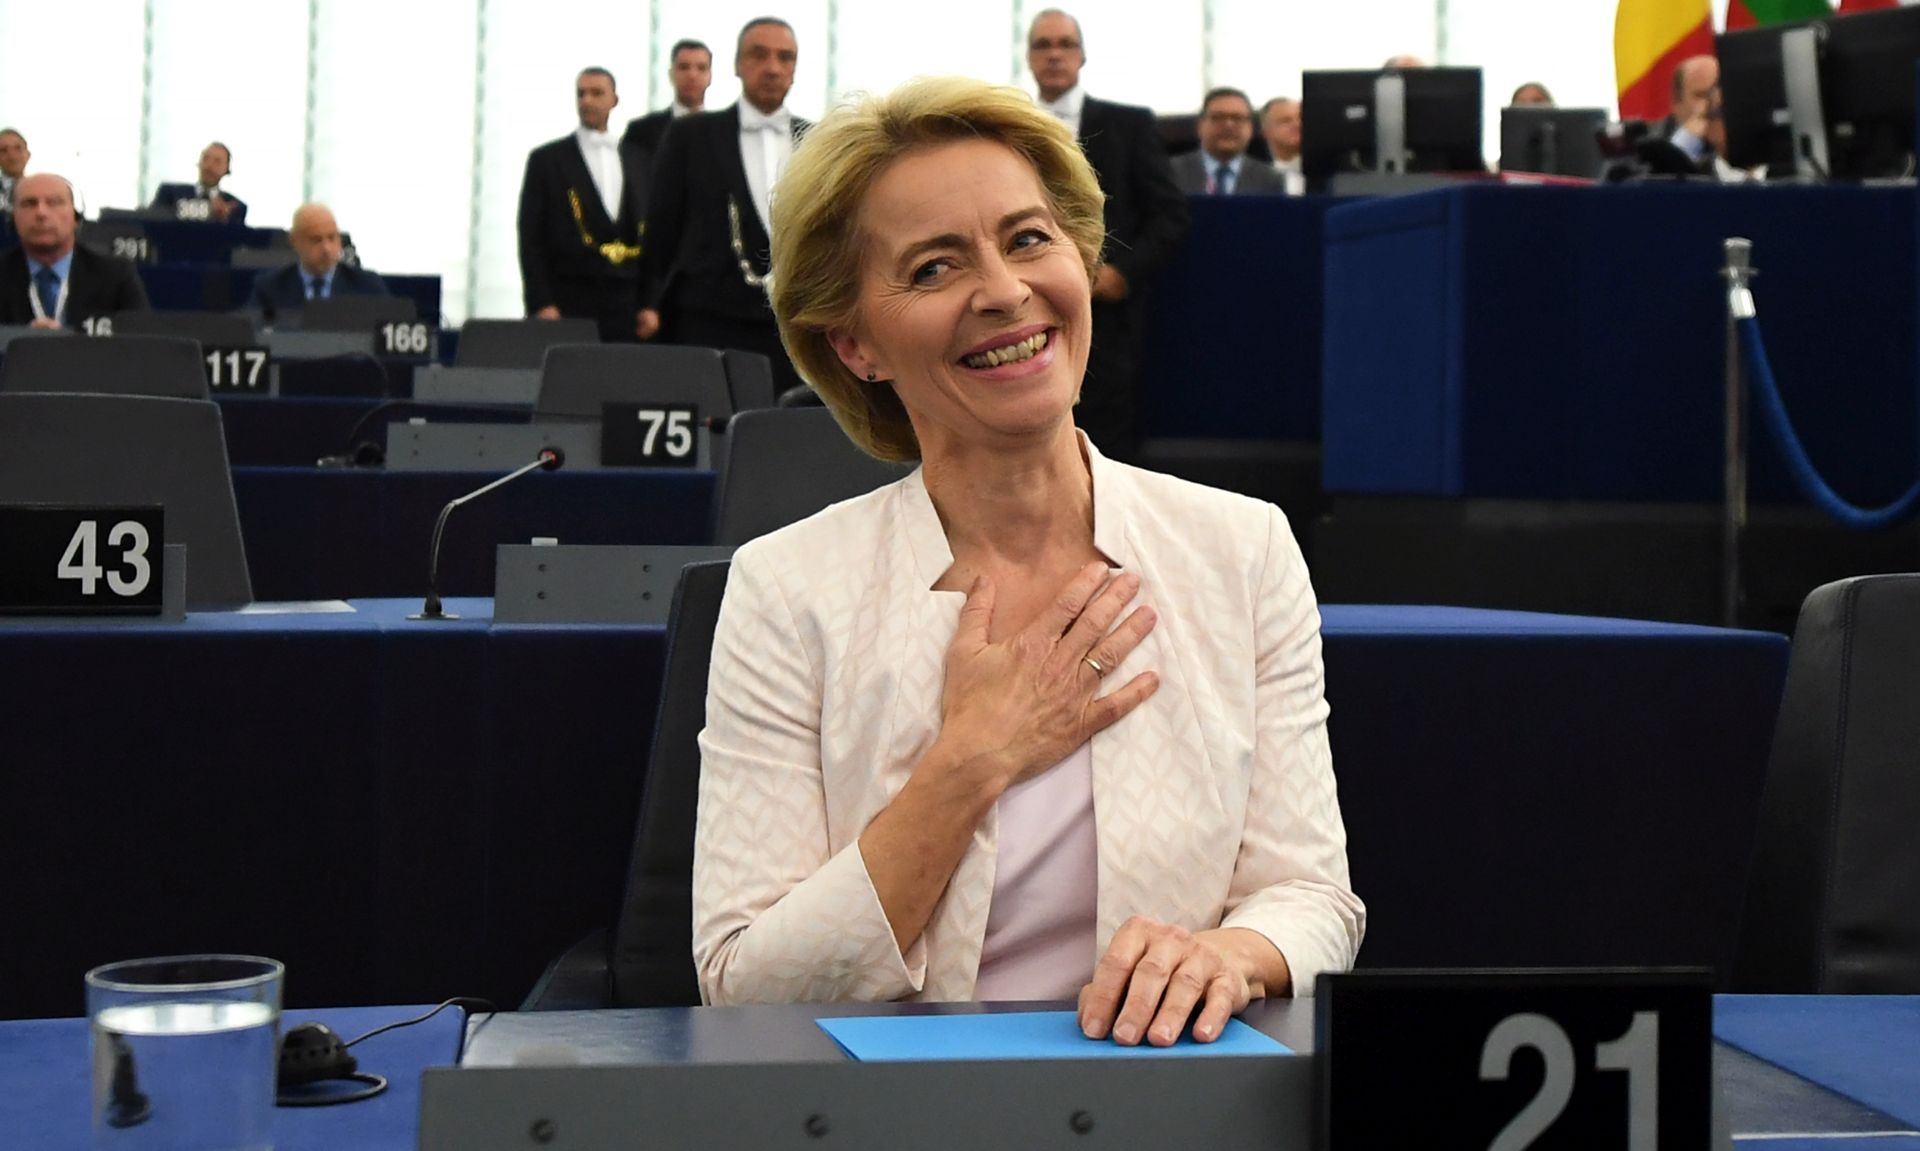 epa07720940 Ursula von der Leyen and nominated President of the European Commission reacts after a vote at the European Parliament in Strasbourg, France, 16 July 2019. European Parliament voted in favor of Ursula von der Leyen as the new President of the European Commission.  EPA/PATRICK SEEGER